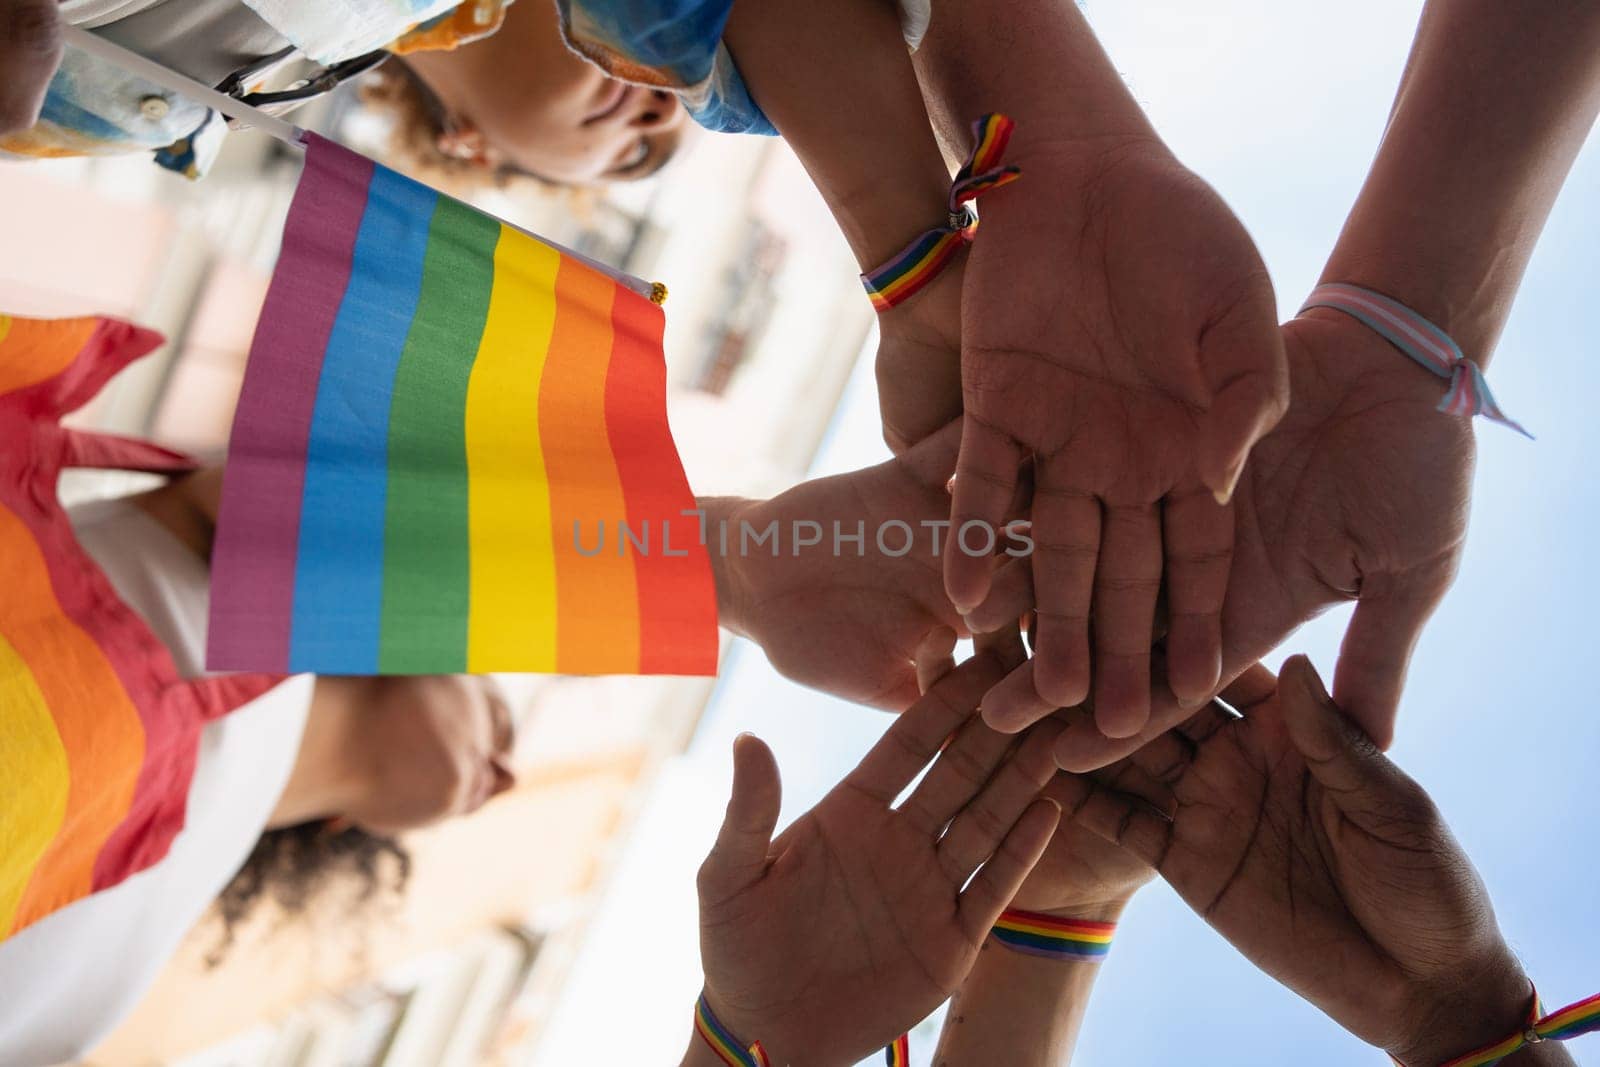 A group of people are holding hands and a rainbow flag. Scene is one of unity and support for the LGBTQ community.